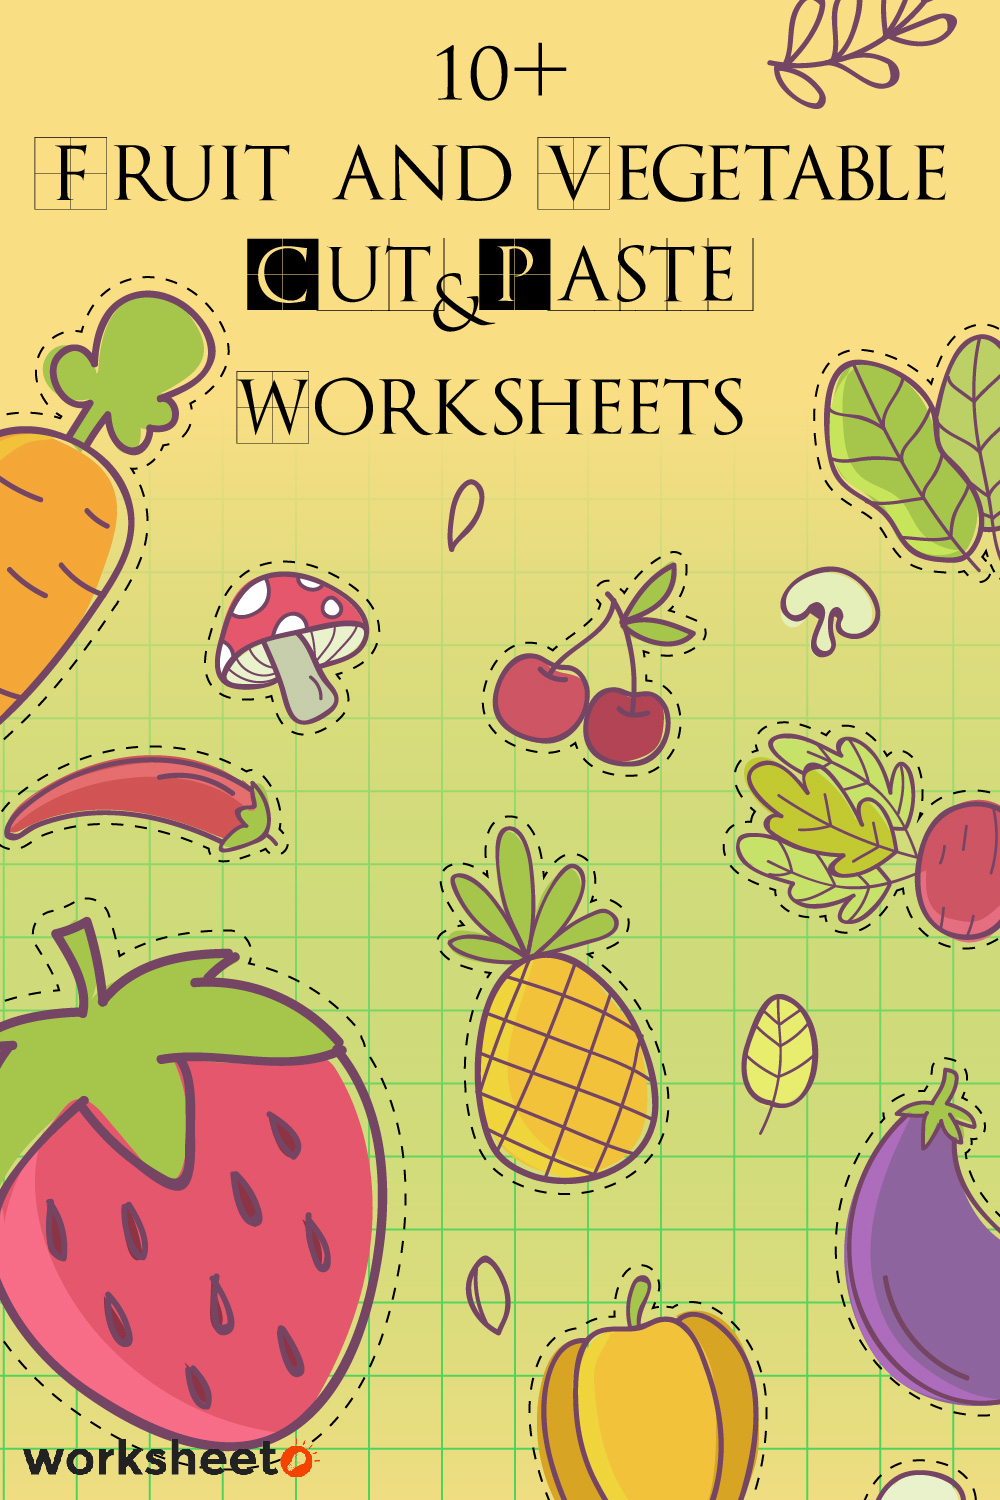 Fruit and Vegetable Cut and Paste Worksheets